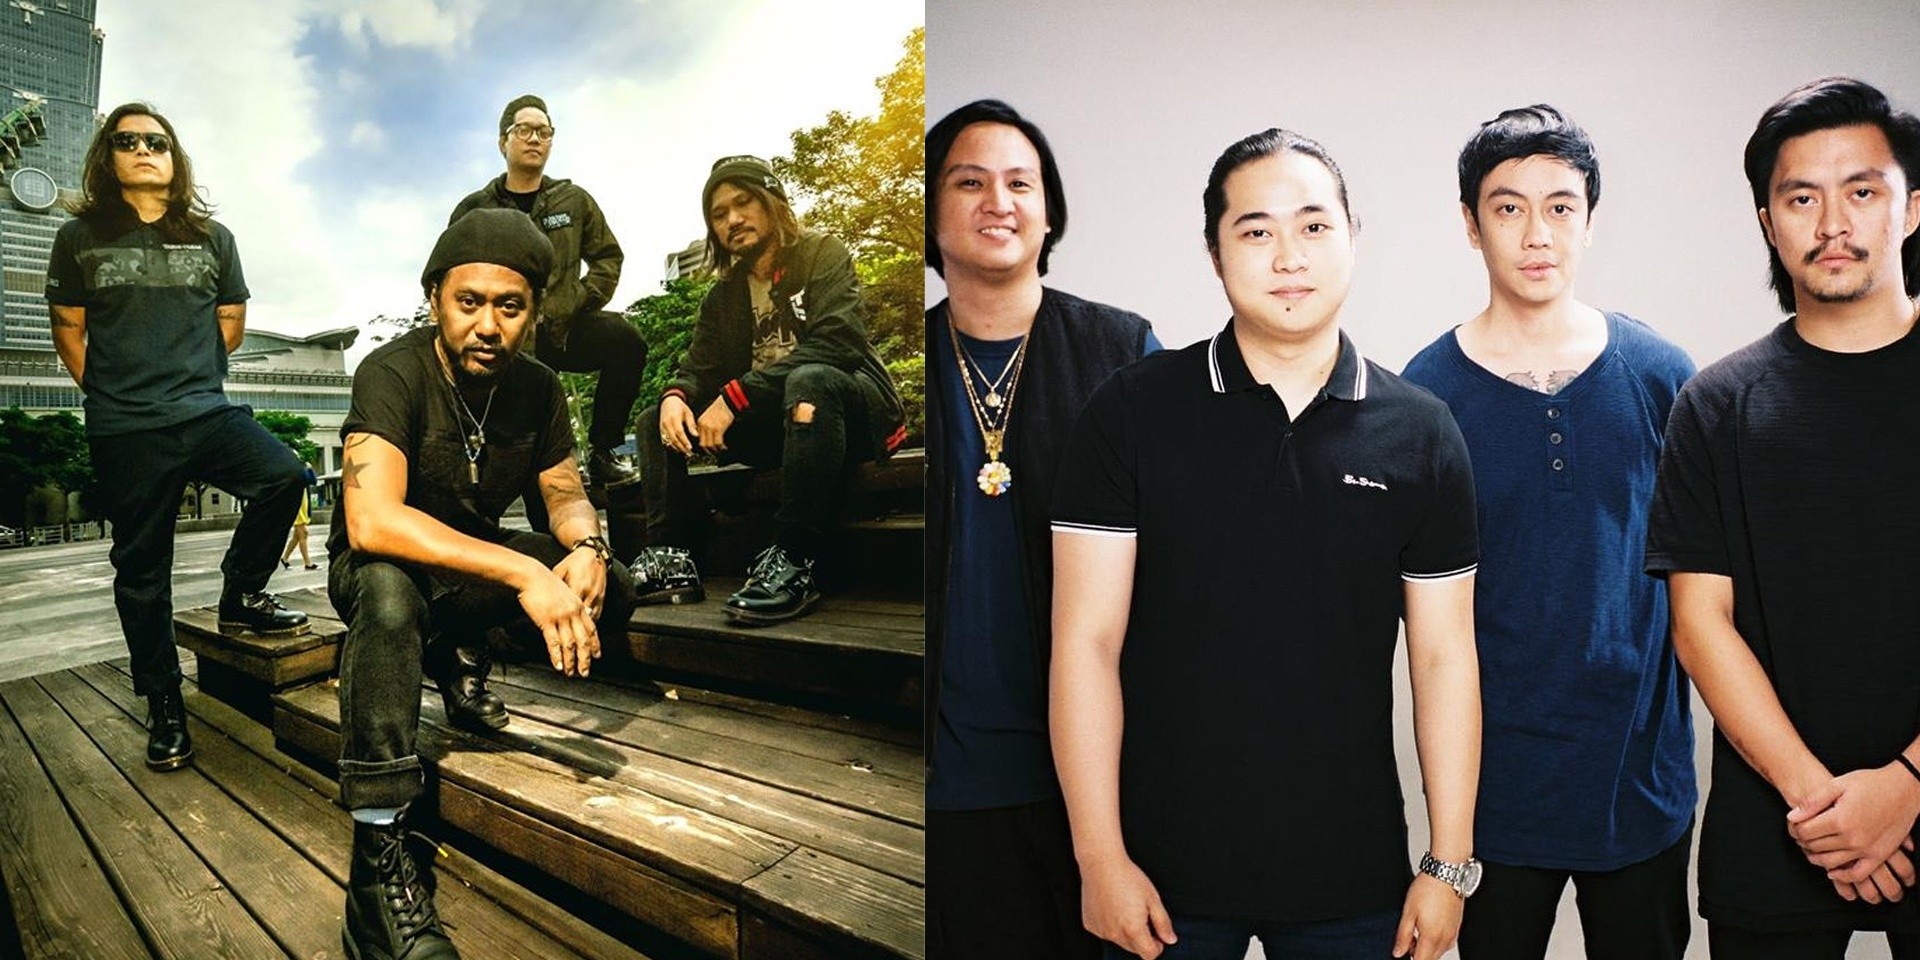 Typecast and Chicosci to perform at Emo Nights 1: Dashboard Confessional and My Chemical Romance